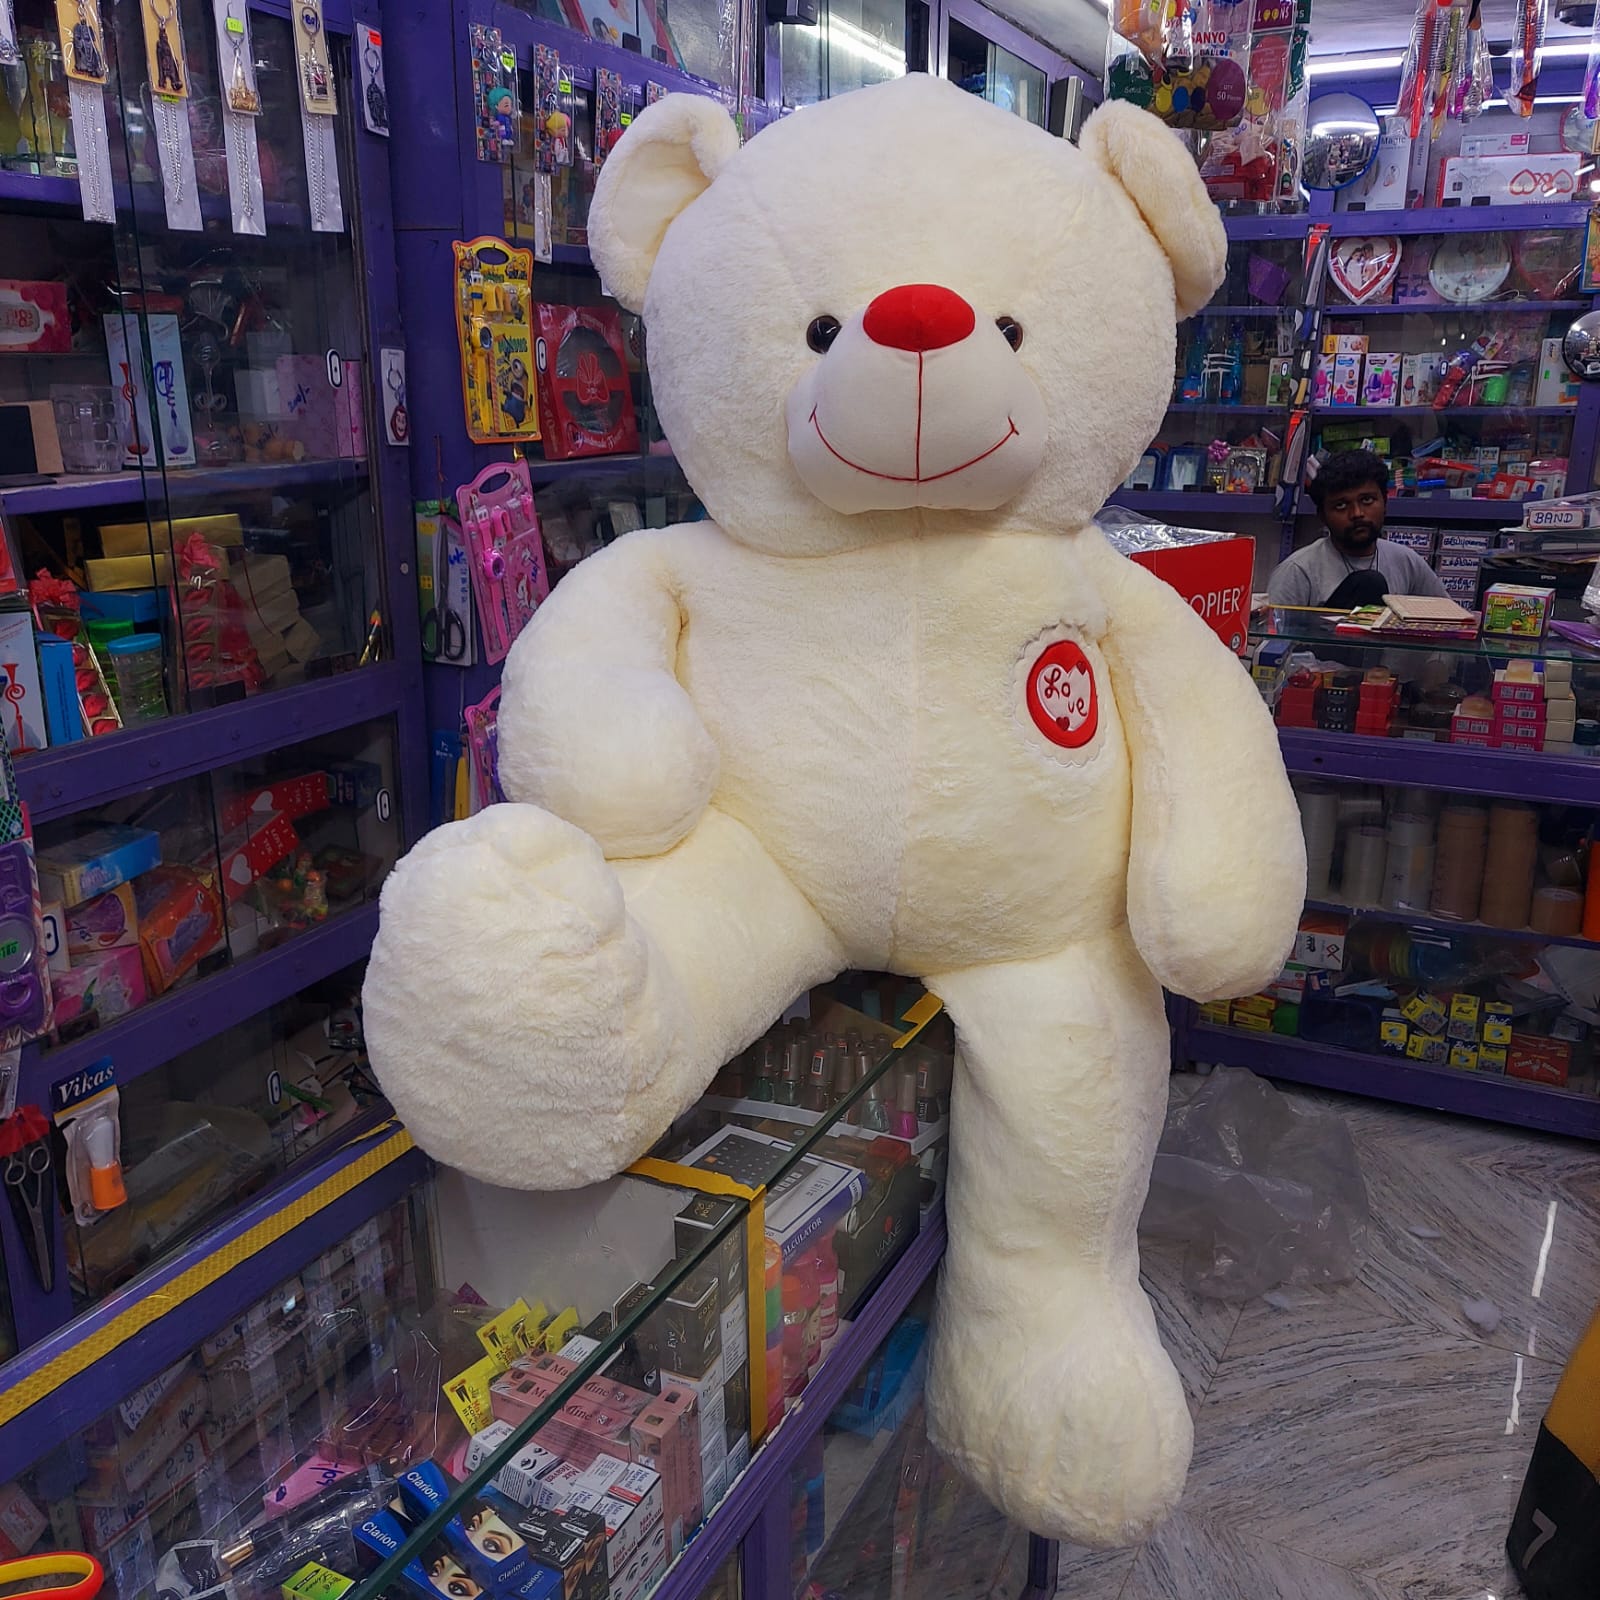 Buy Teddy Bear 5 feet Toy at Affordable Price, Plush Toy